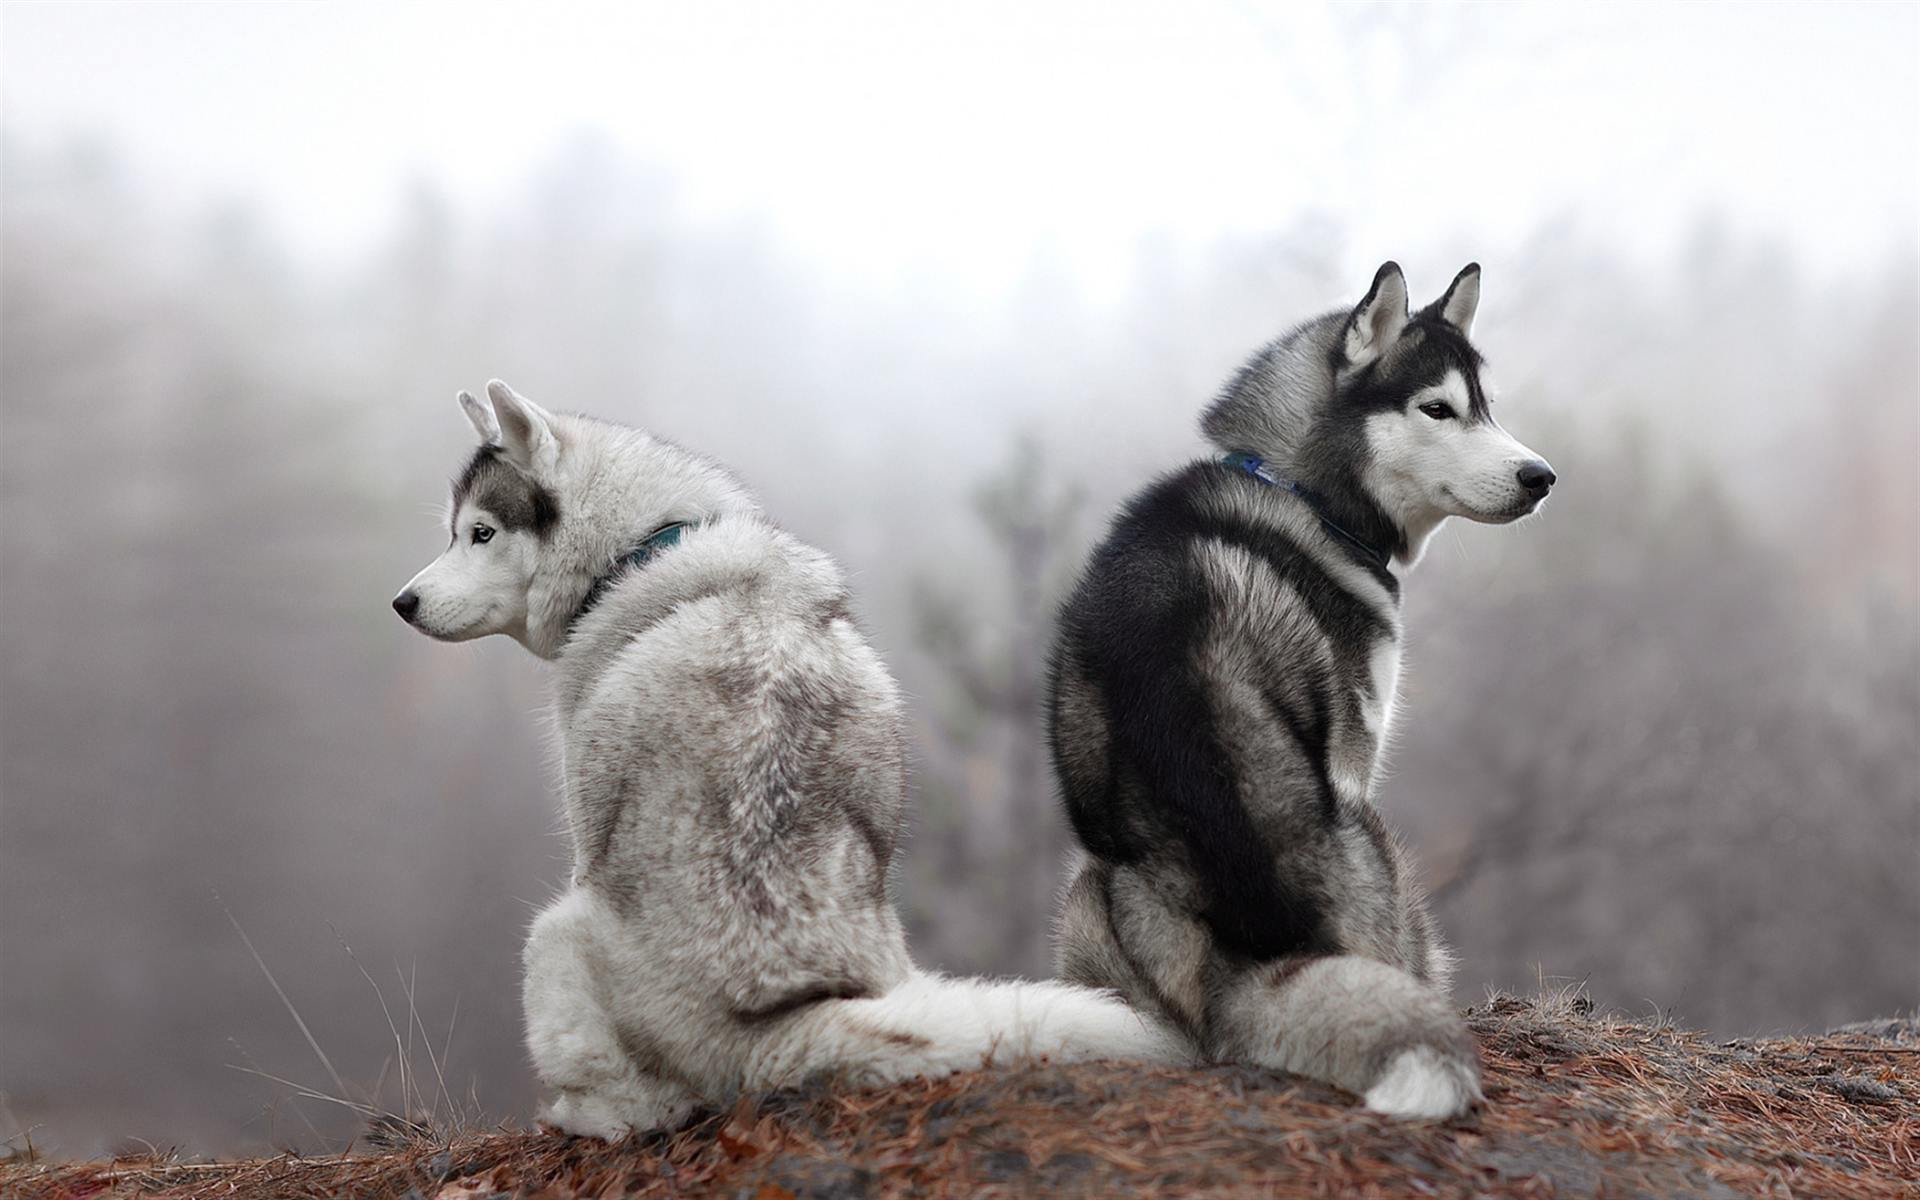 Download wallpaper husky, beautiful dogs, white husky, gray husky, forest, autumn, dogs for desktop with resolution 1920x1200. High Quality HD picture wallpaper